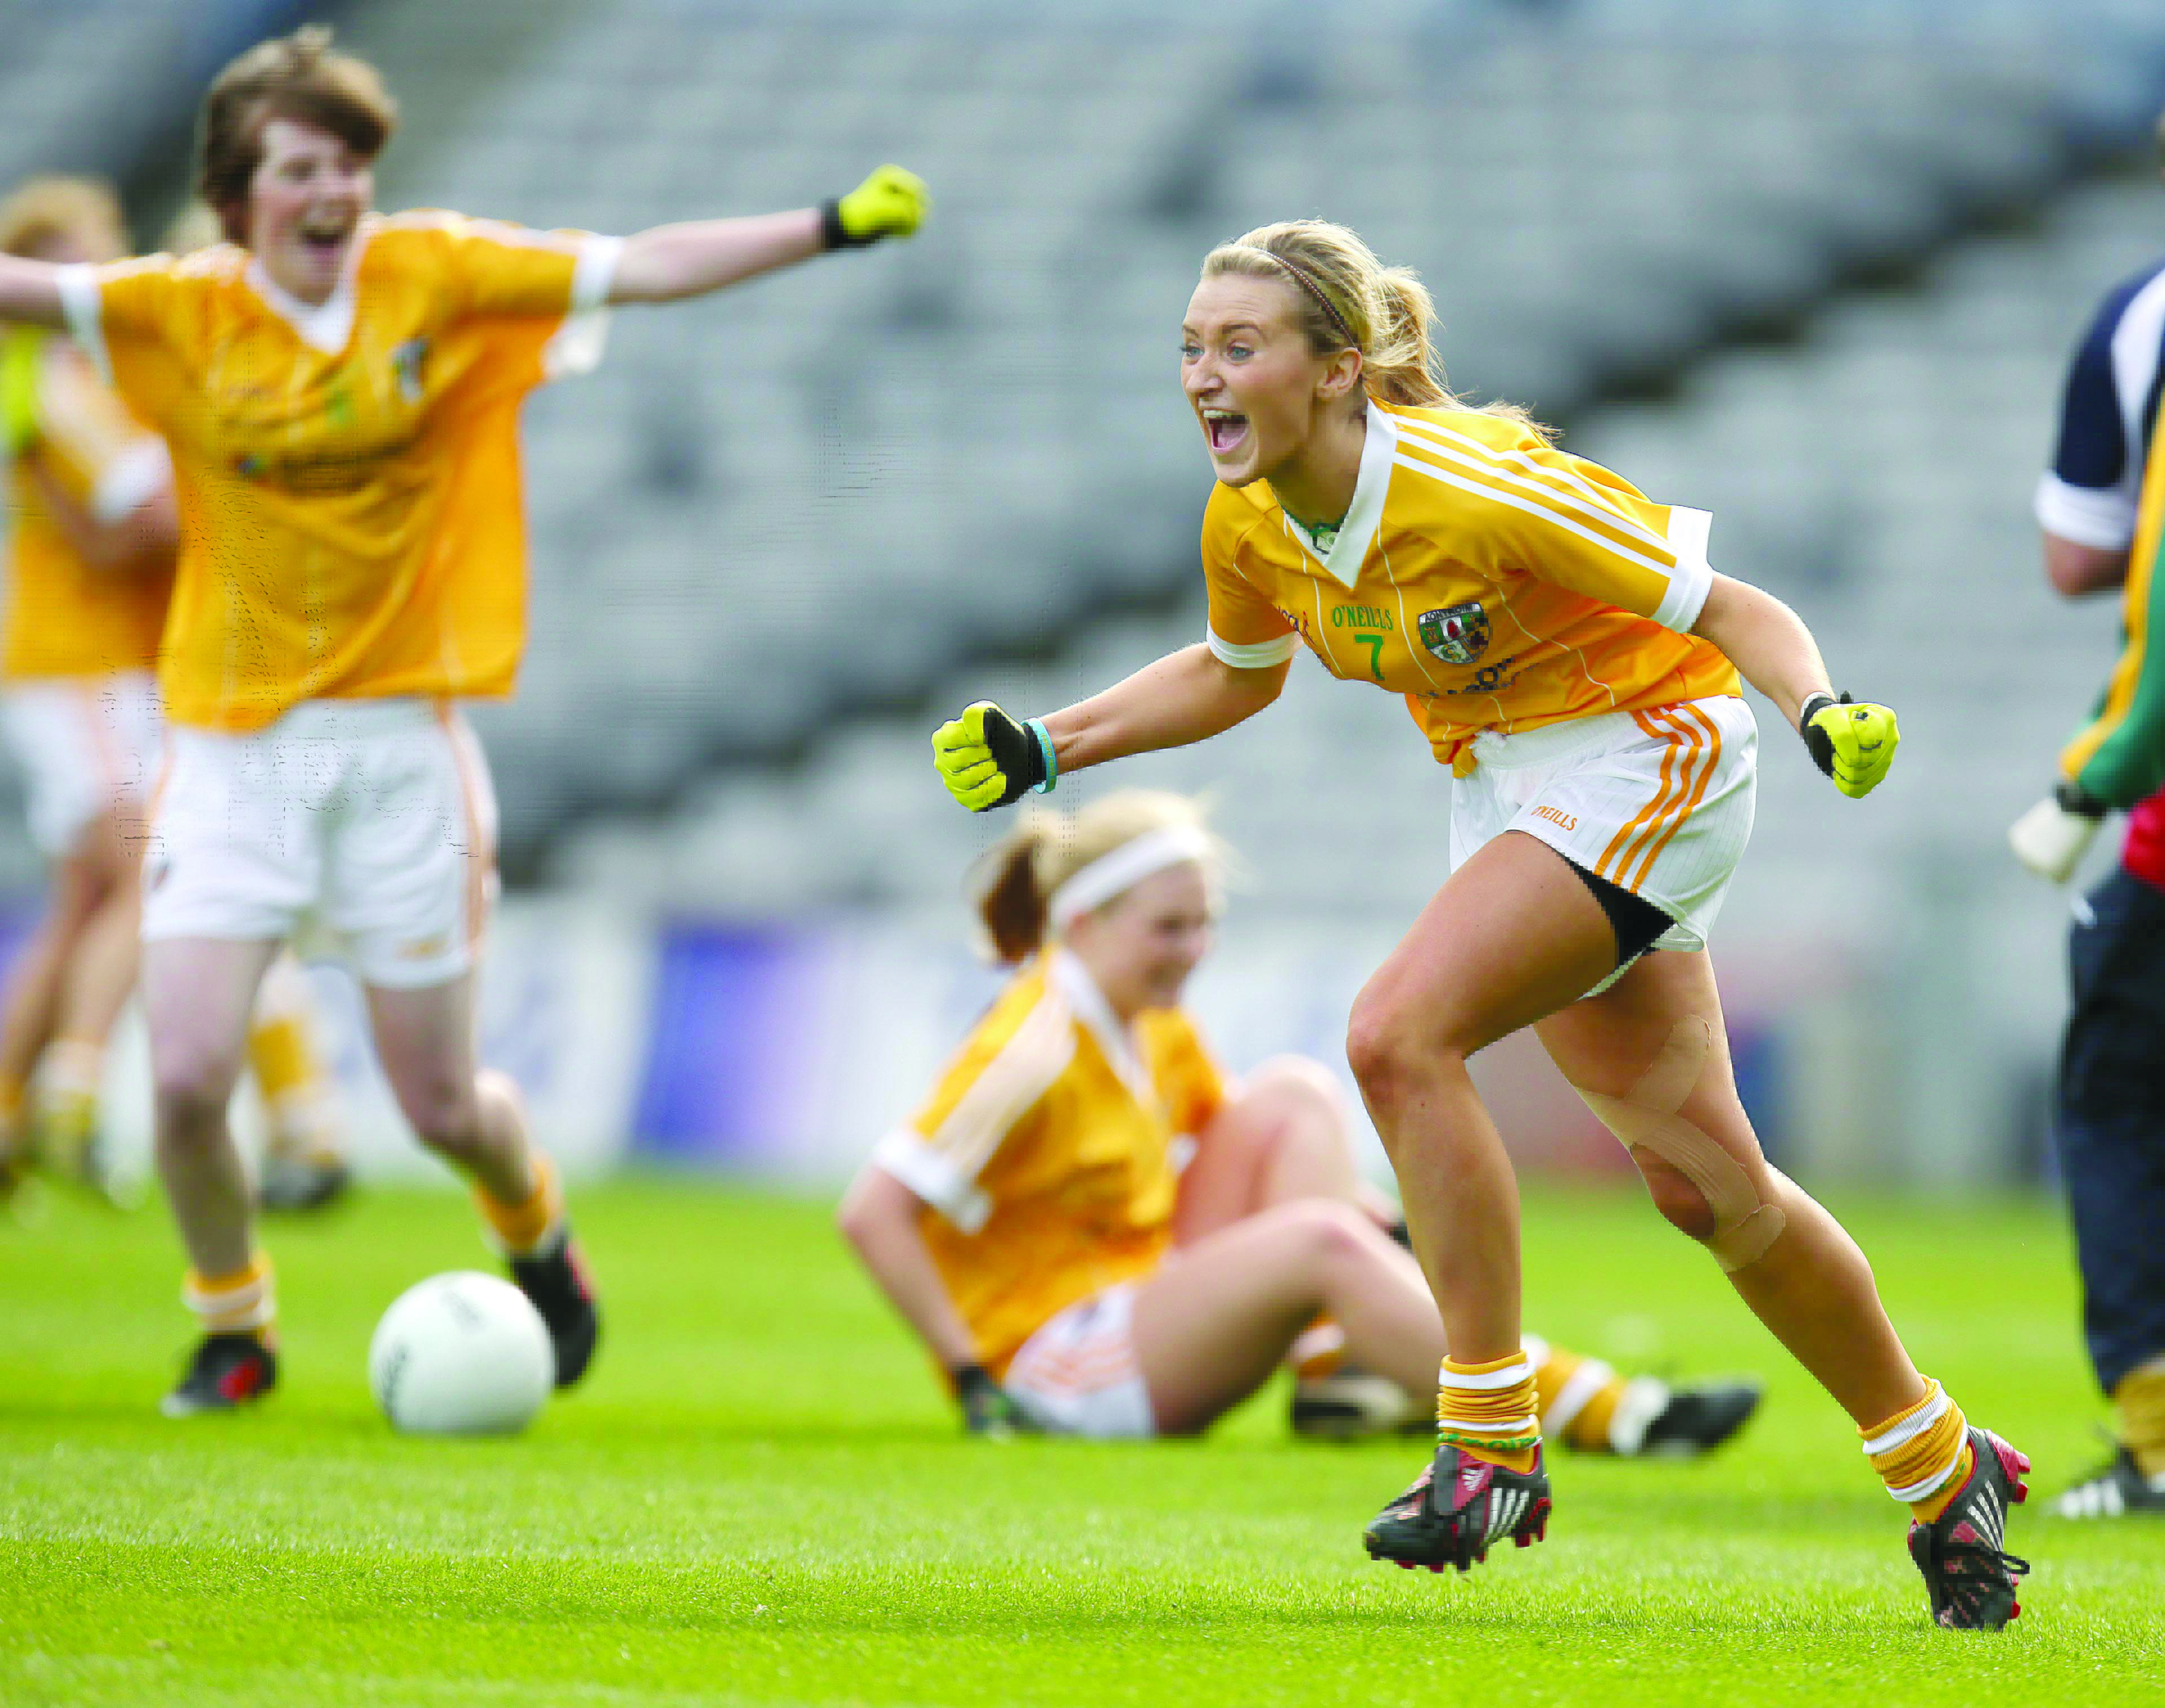 Áine Tubridy celebrates at the final whistle in the 2012 final, but has lost out in two finals since